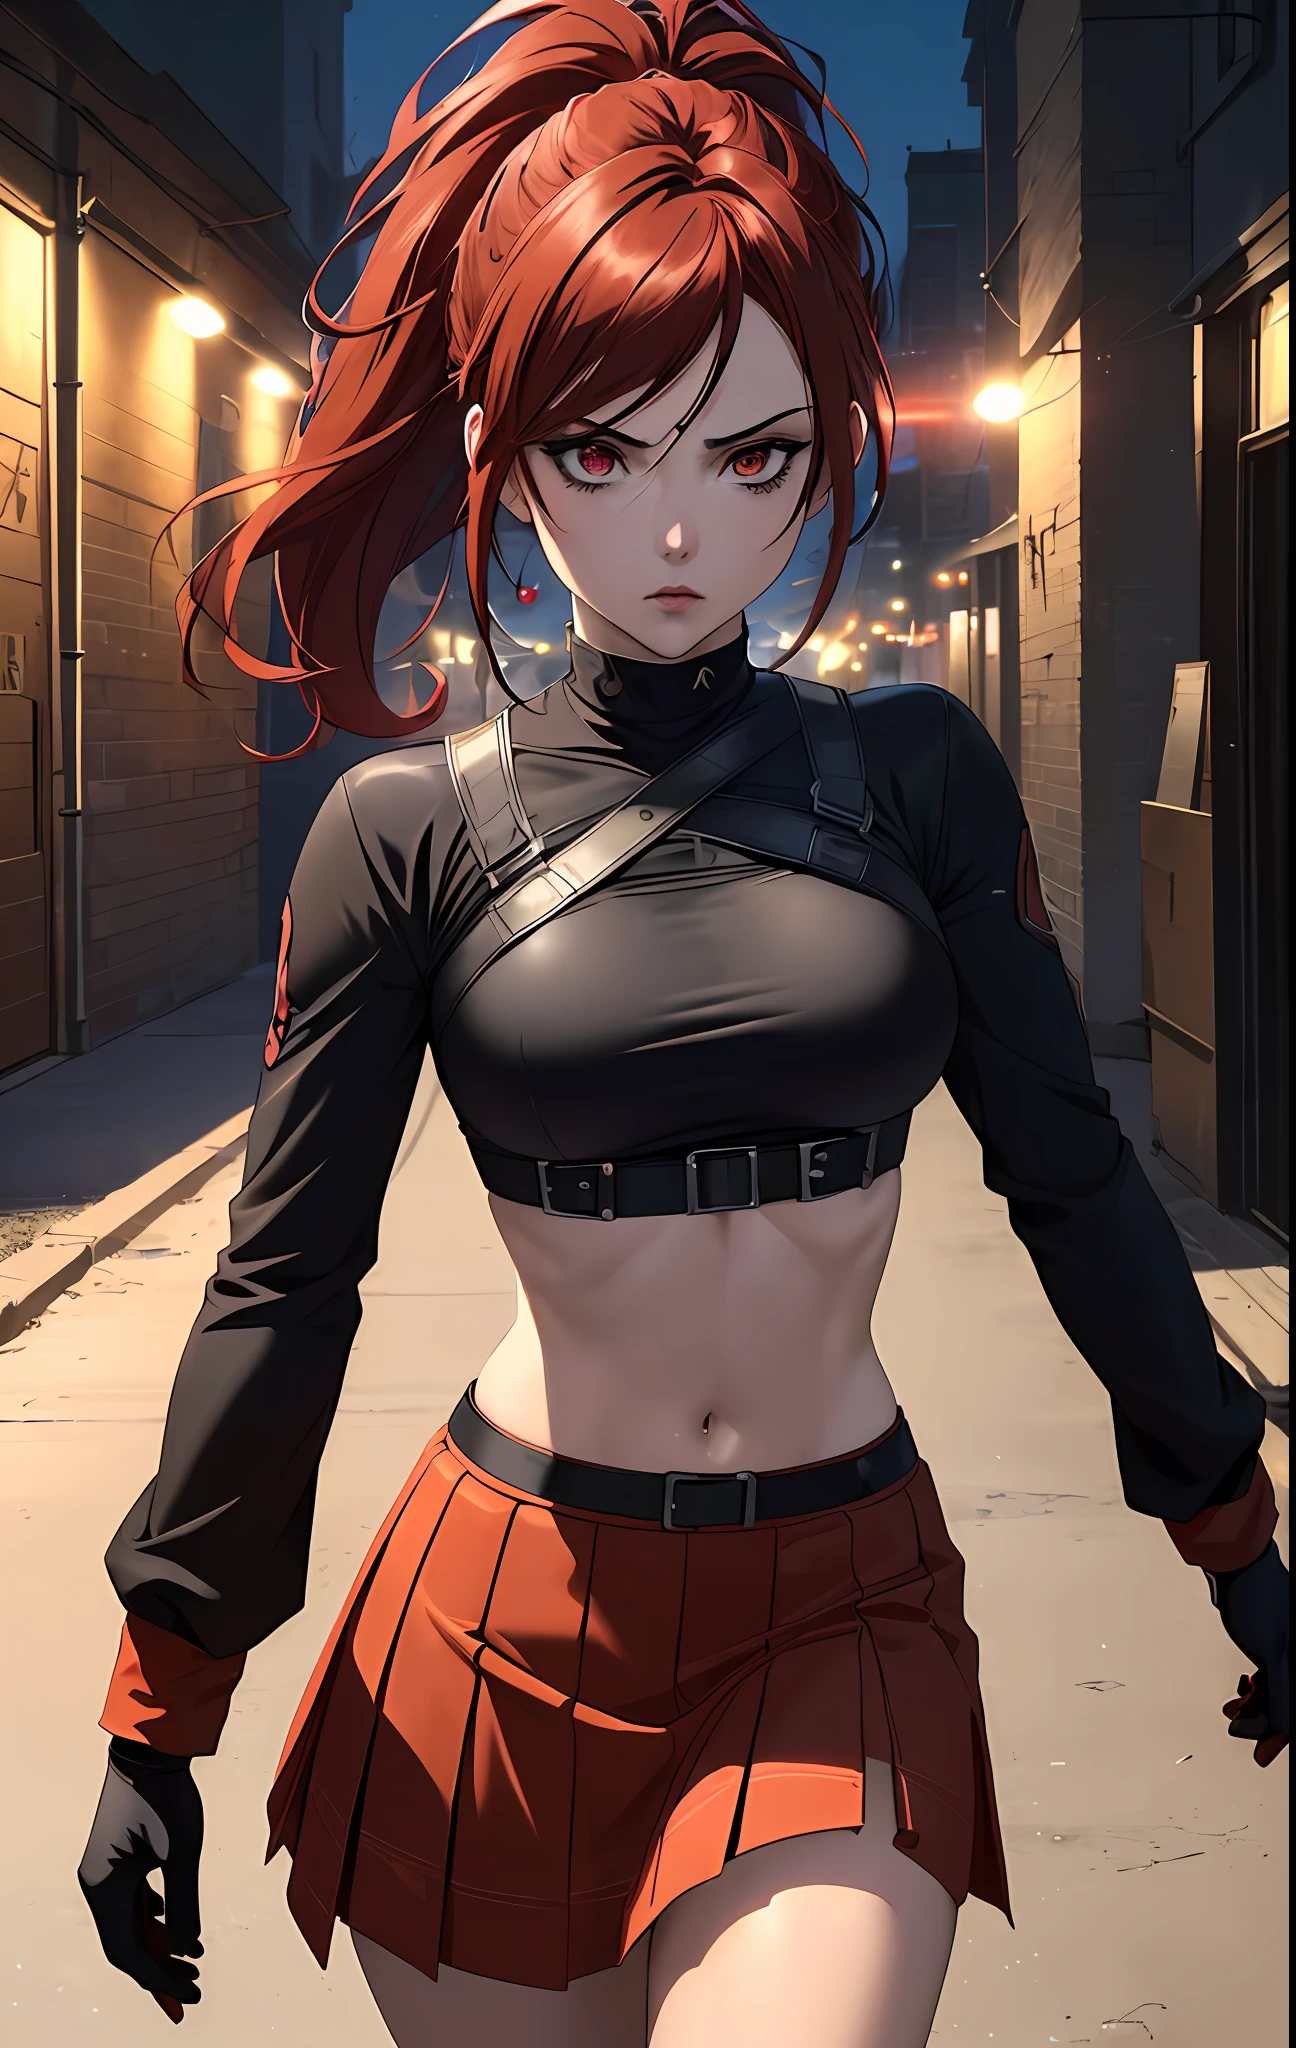 ((((dramatic))), (((gritty))), (((intense))),anime character,1girl,solo,dark red hair,tied up hairstyle, wearing gloves,wearing a crop top,wearing a skirt, modern art,hair covering eye's,, beautiful face, beautiful eye's, vibrant colors, night, highest quality digital art, Stunning art, wallpaper 4k,8k,k, HD, unparalleled masterpiece, dynamic lighting, cinematic, epic